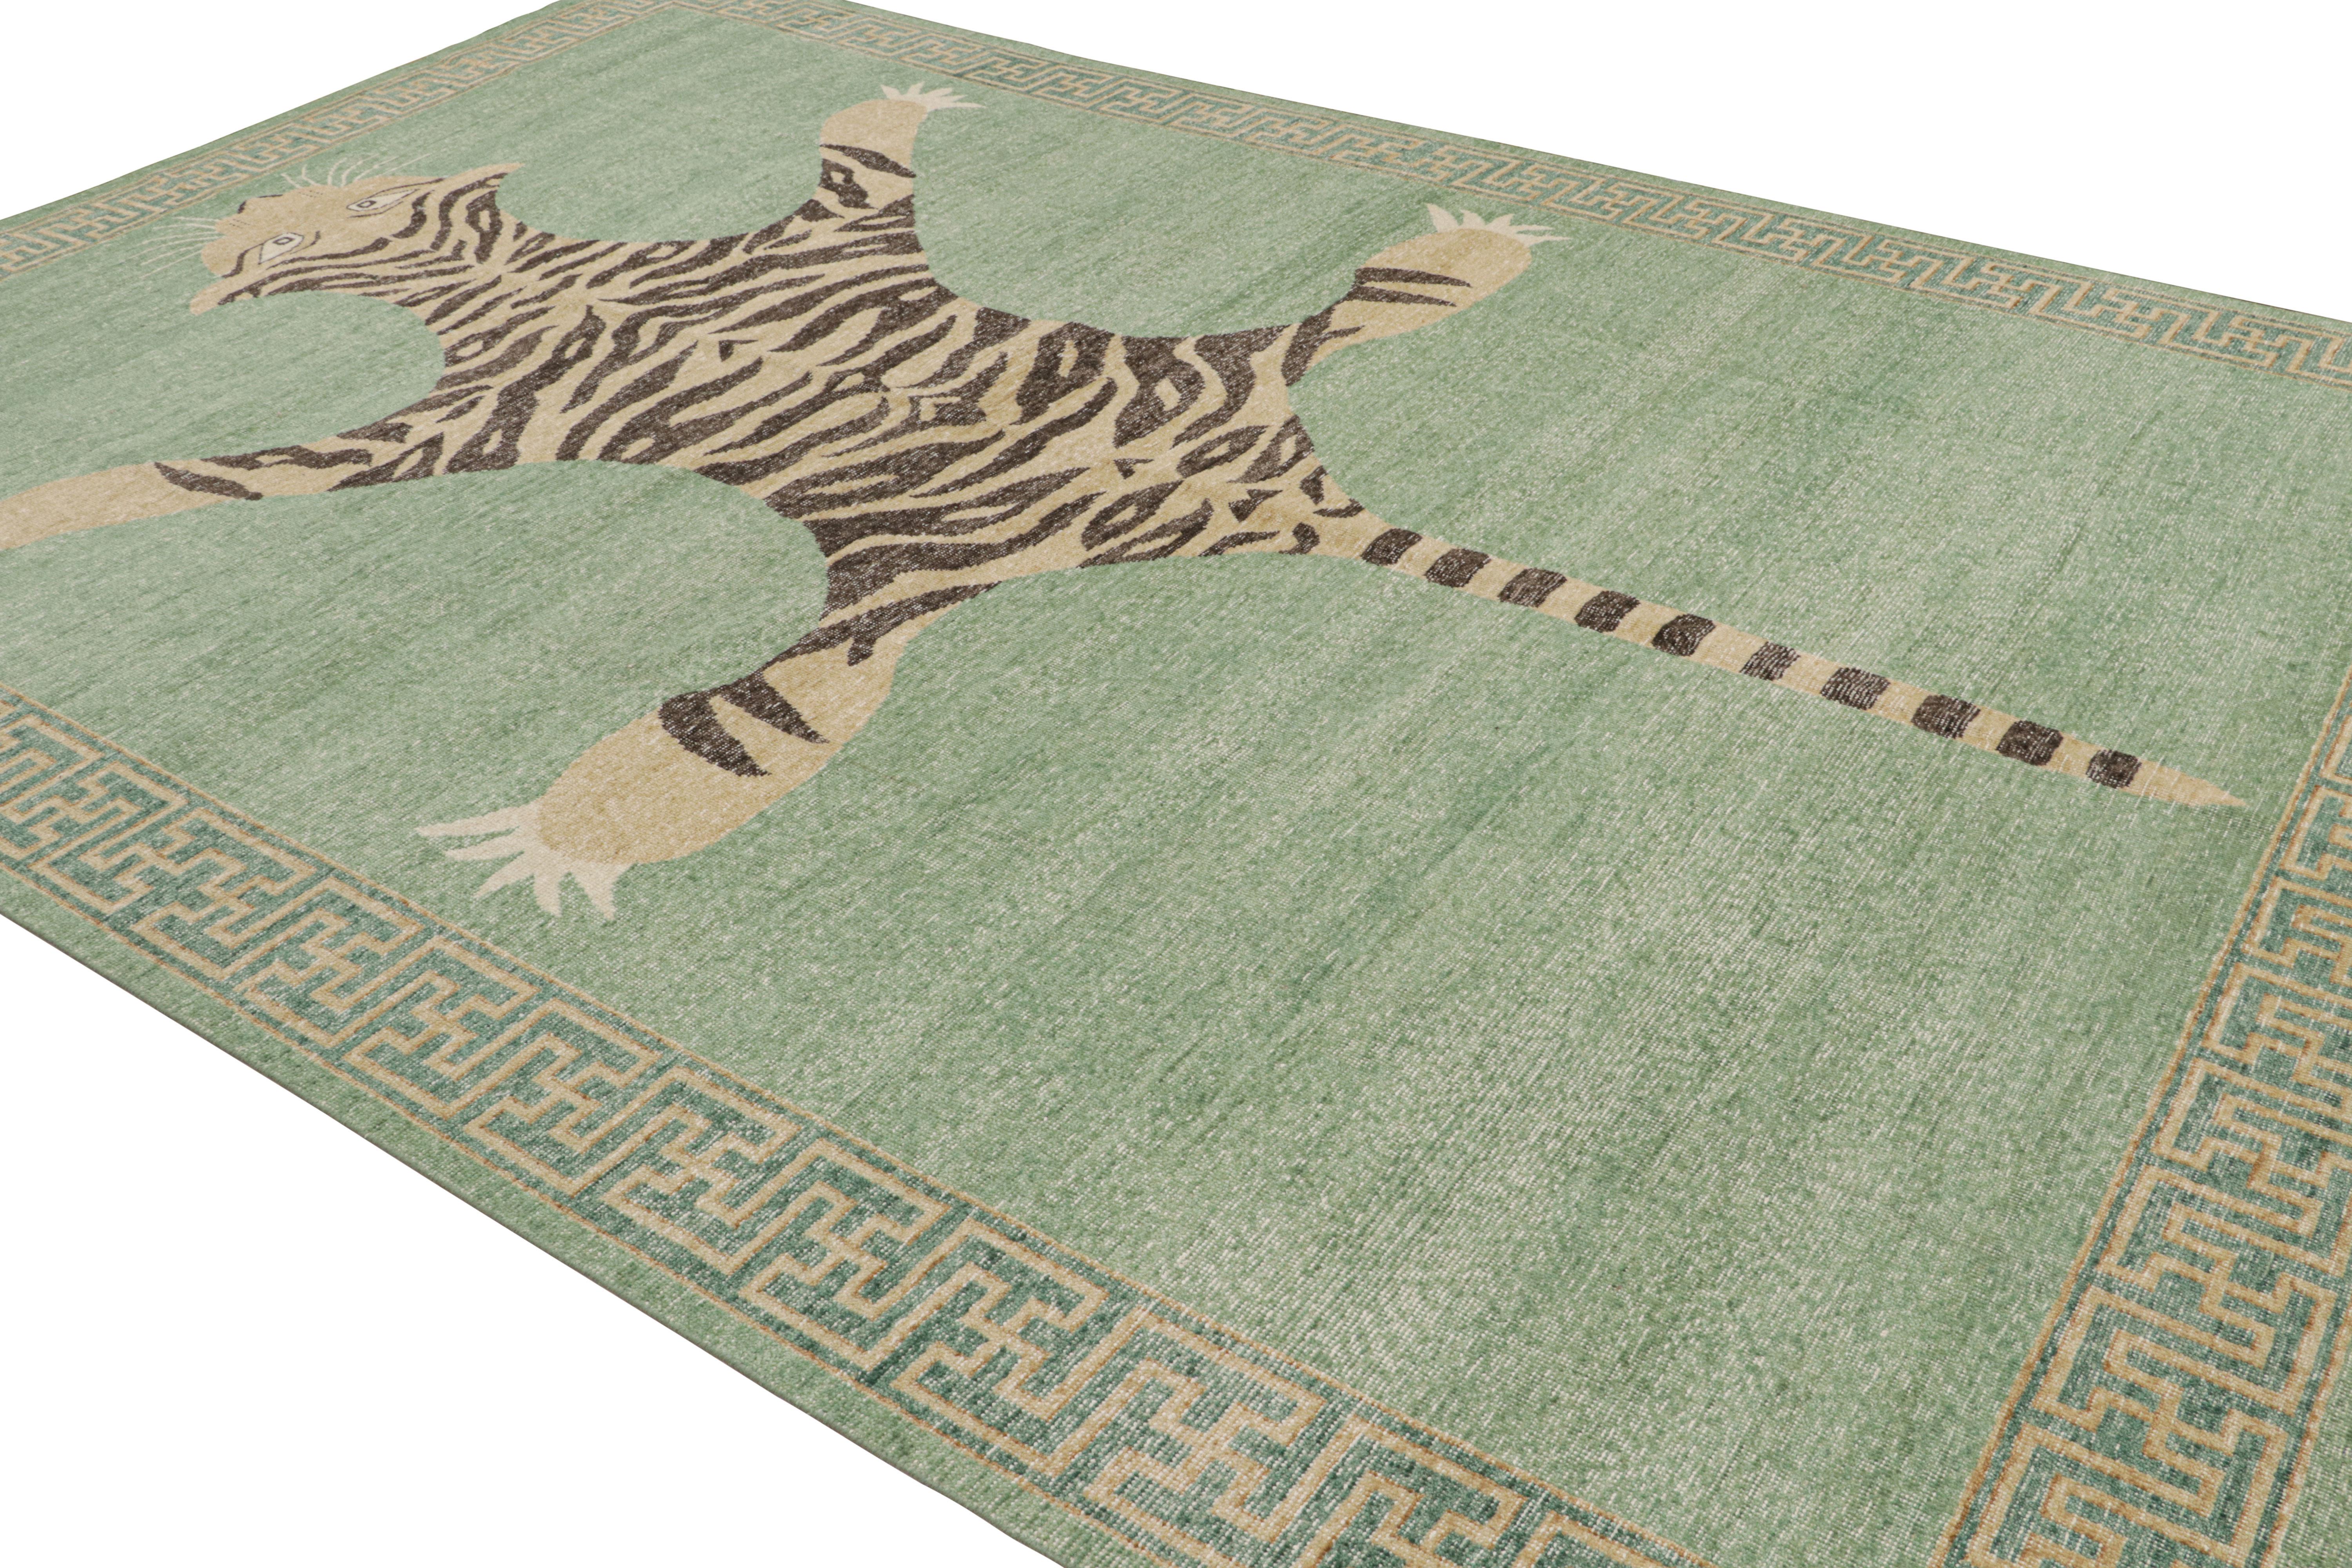 Hand-knotted in wool, this 10x14 tiger pictorial rug has been particularly inspired by a mid-century Indian depiction of the tiger-skin rug style.  

On the Design: 

Keen eyes will enjoy beige-brown and black tiger representation on a spacious